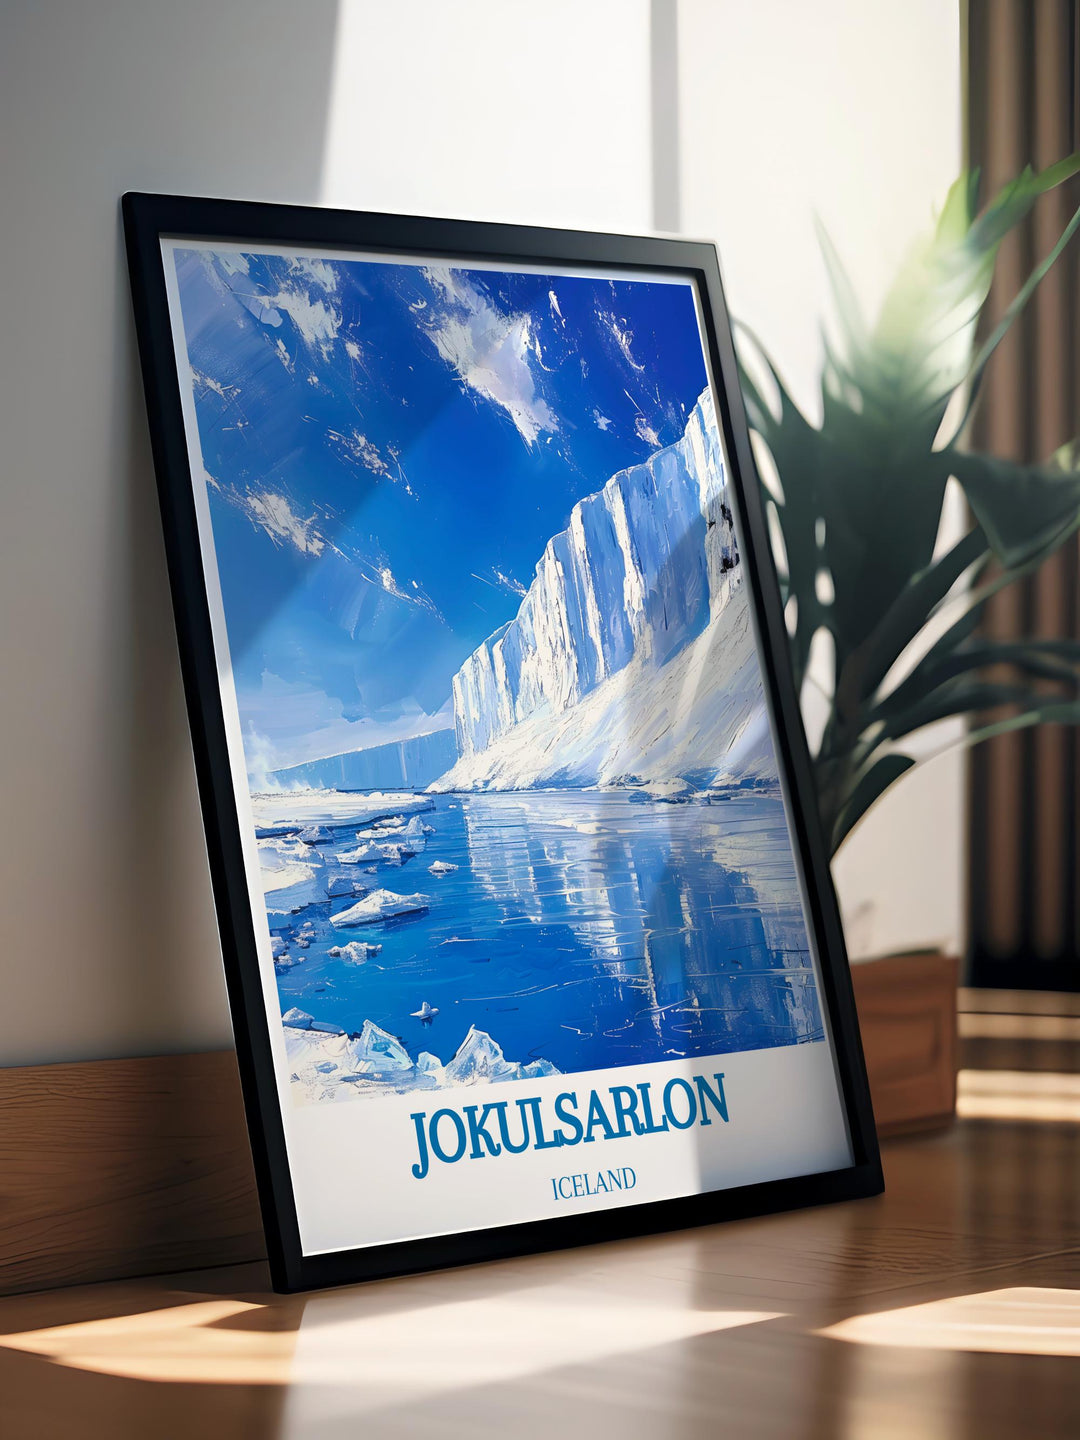 Print of Jokulsarlon with Northern Lights providing a colorful sky, excellent for a vibrant addition to any wall space